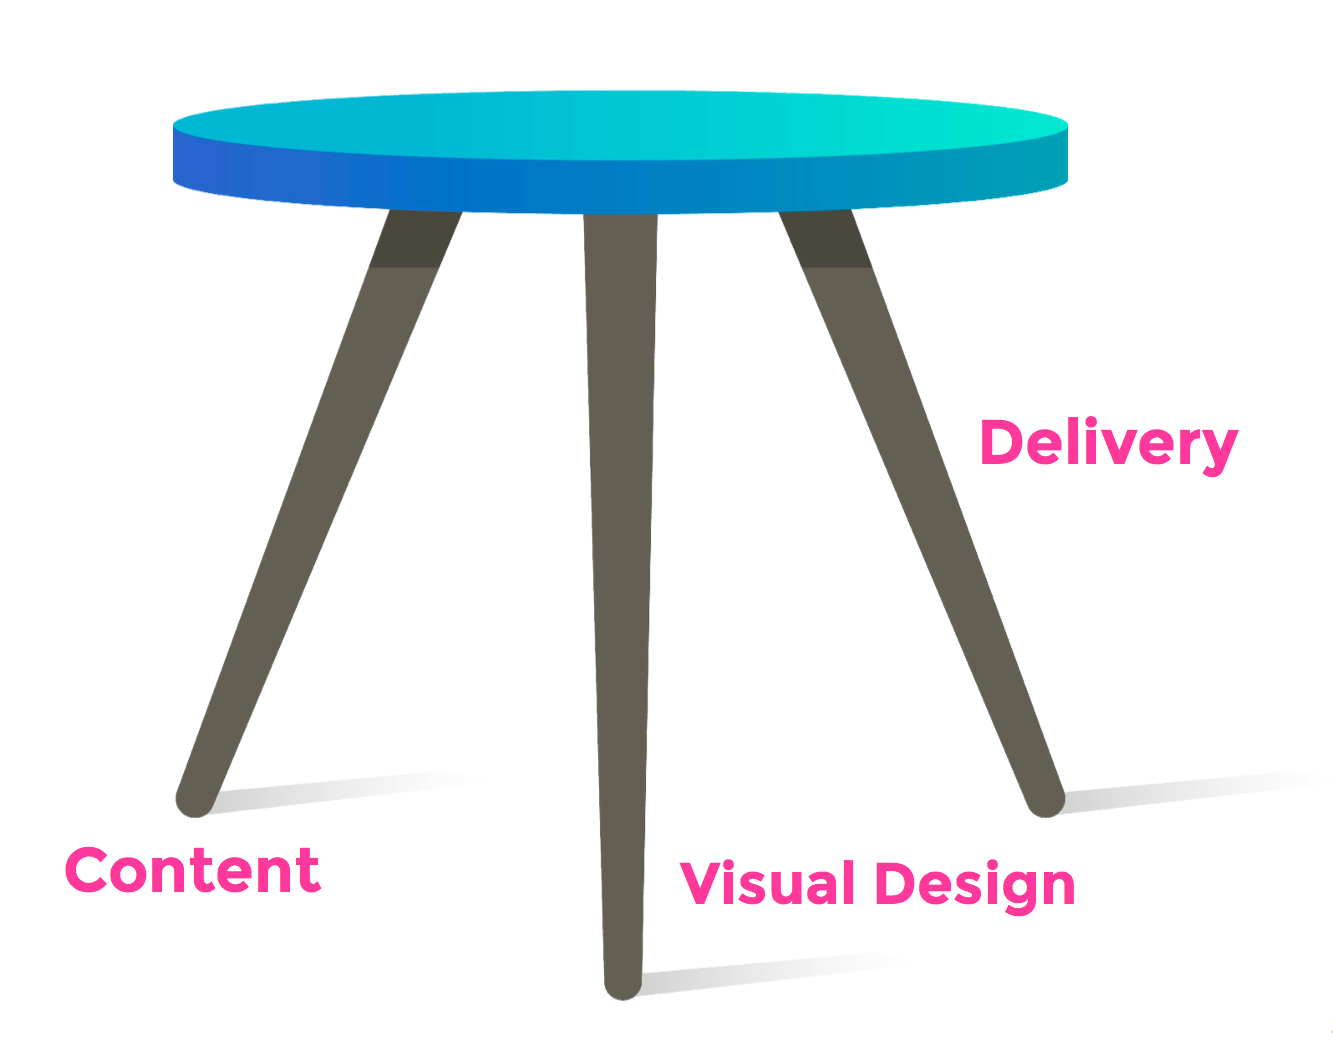 Three Legs of a Stunning Presentation : content, visual design and delivery